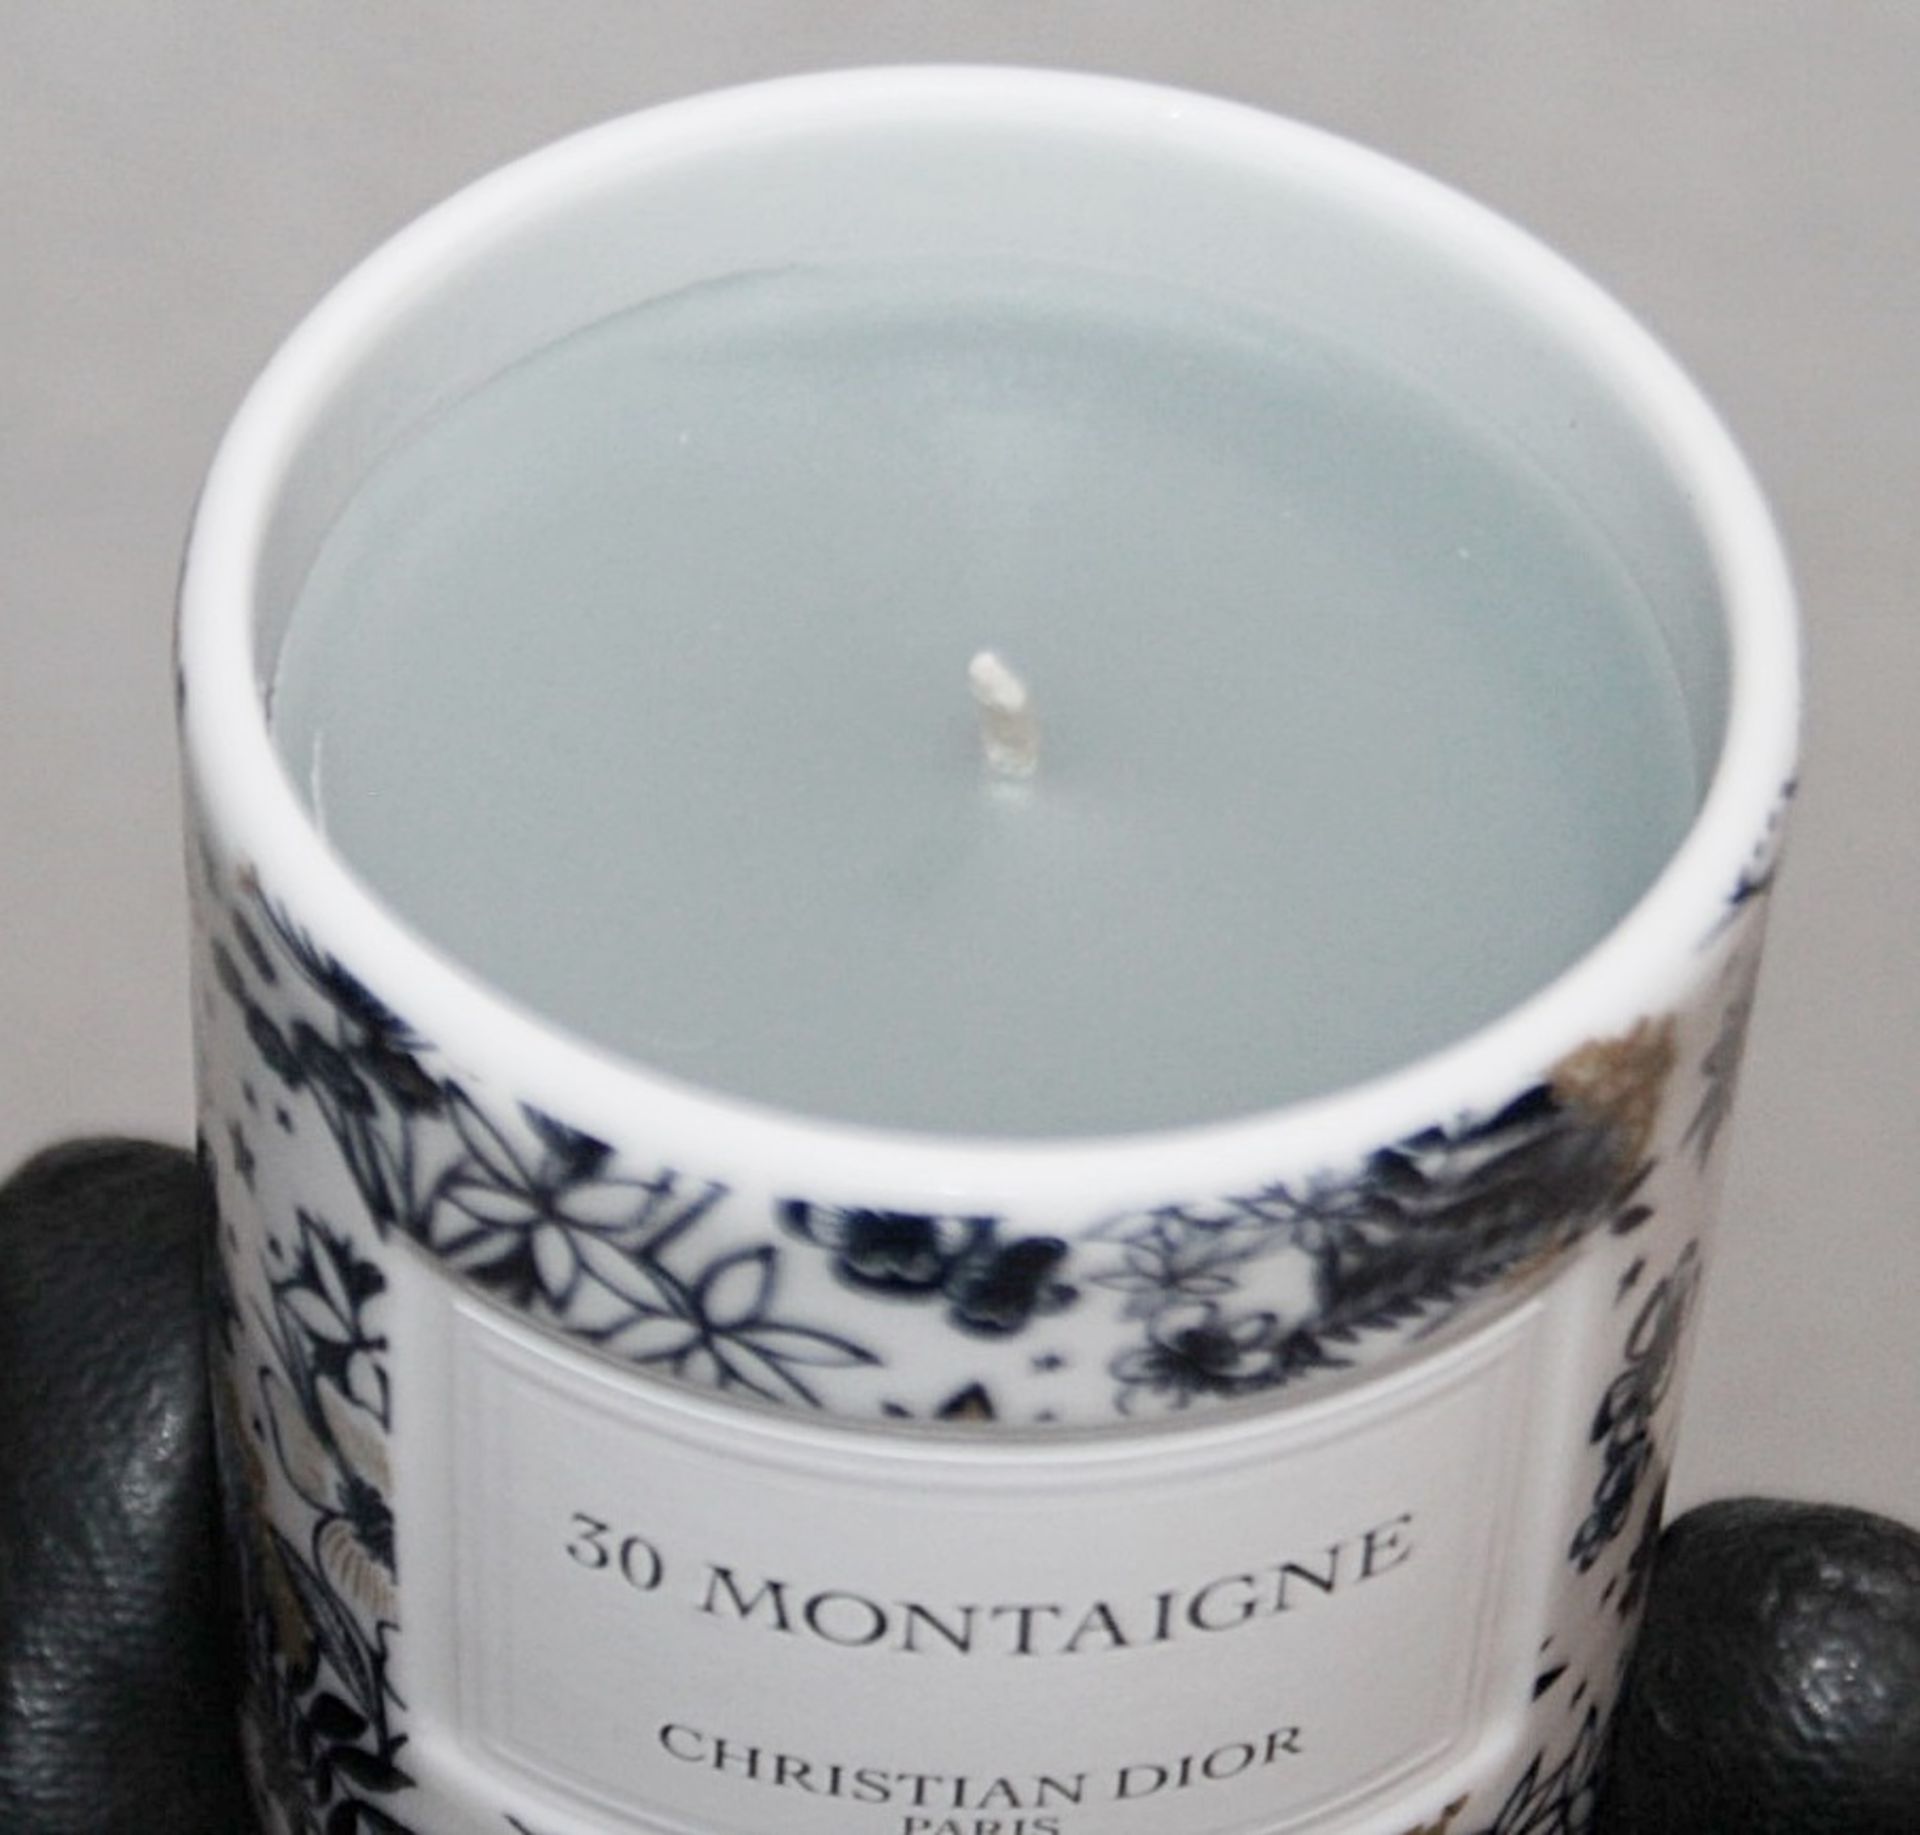 1 x CHRISTIAN DIOR '30 Montaigne' Candle (85g) - Unused Boxed Stock - Ref: HAS817/APR22/WH2/C1 - - Image 3 of 6